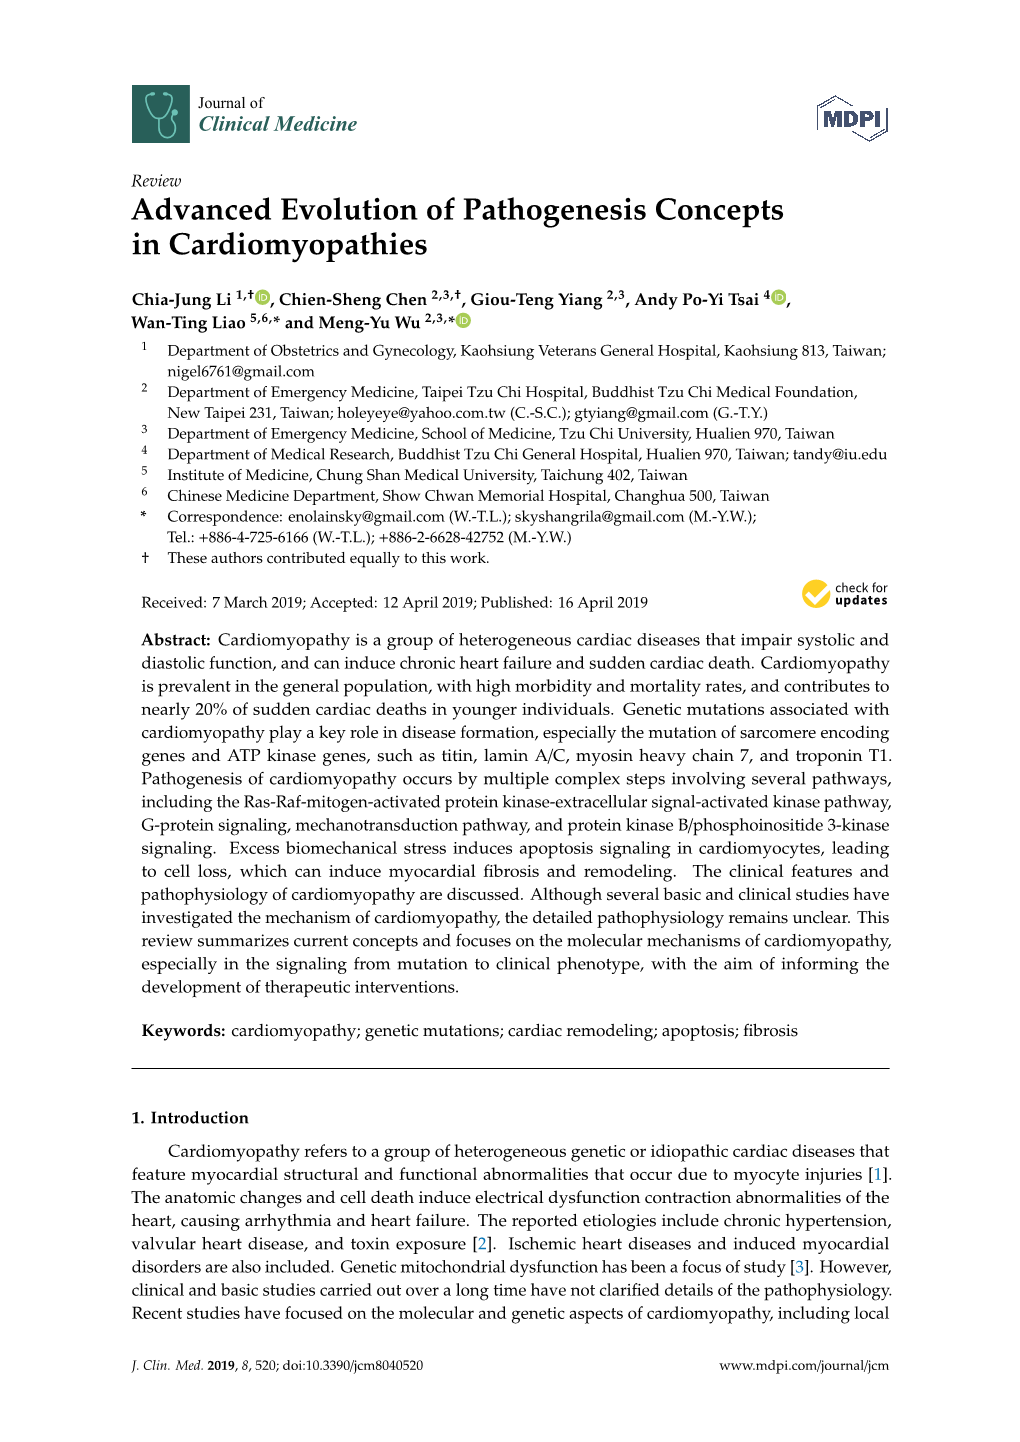 Advanced Evolution of Pathogenesis Concepts in Cardiomyopathies